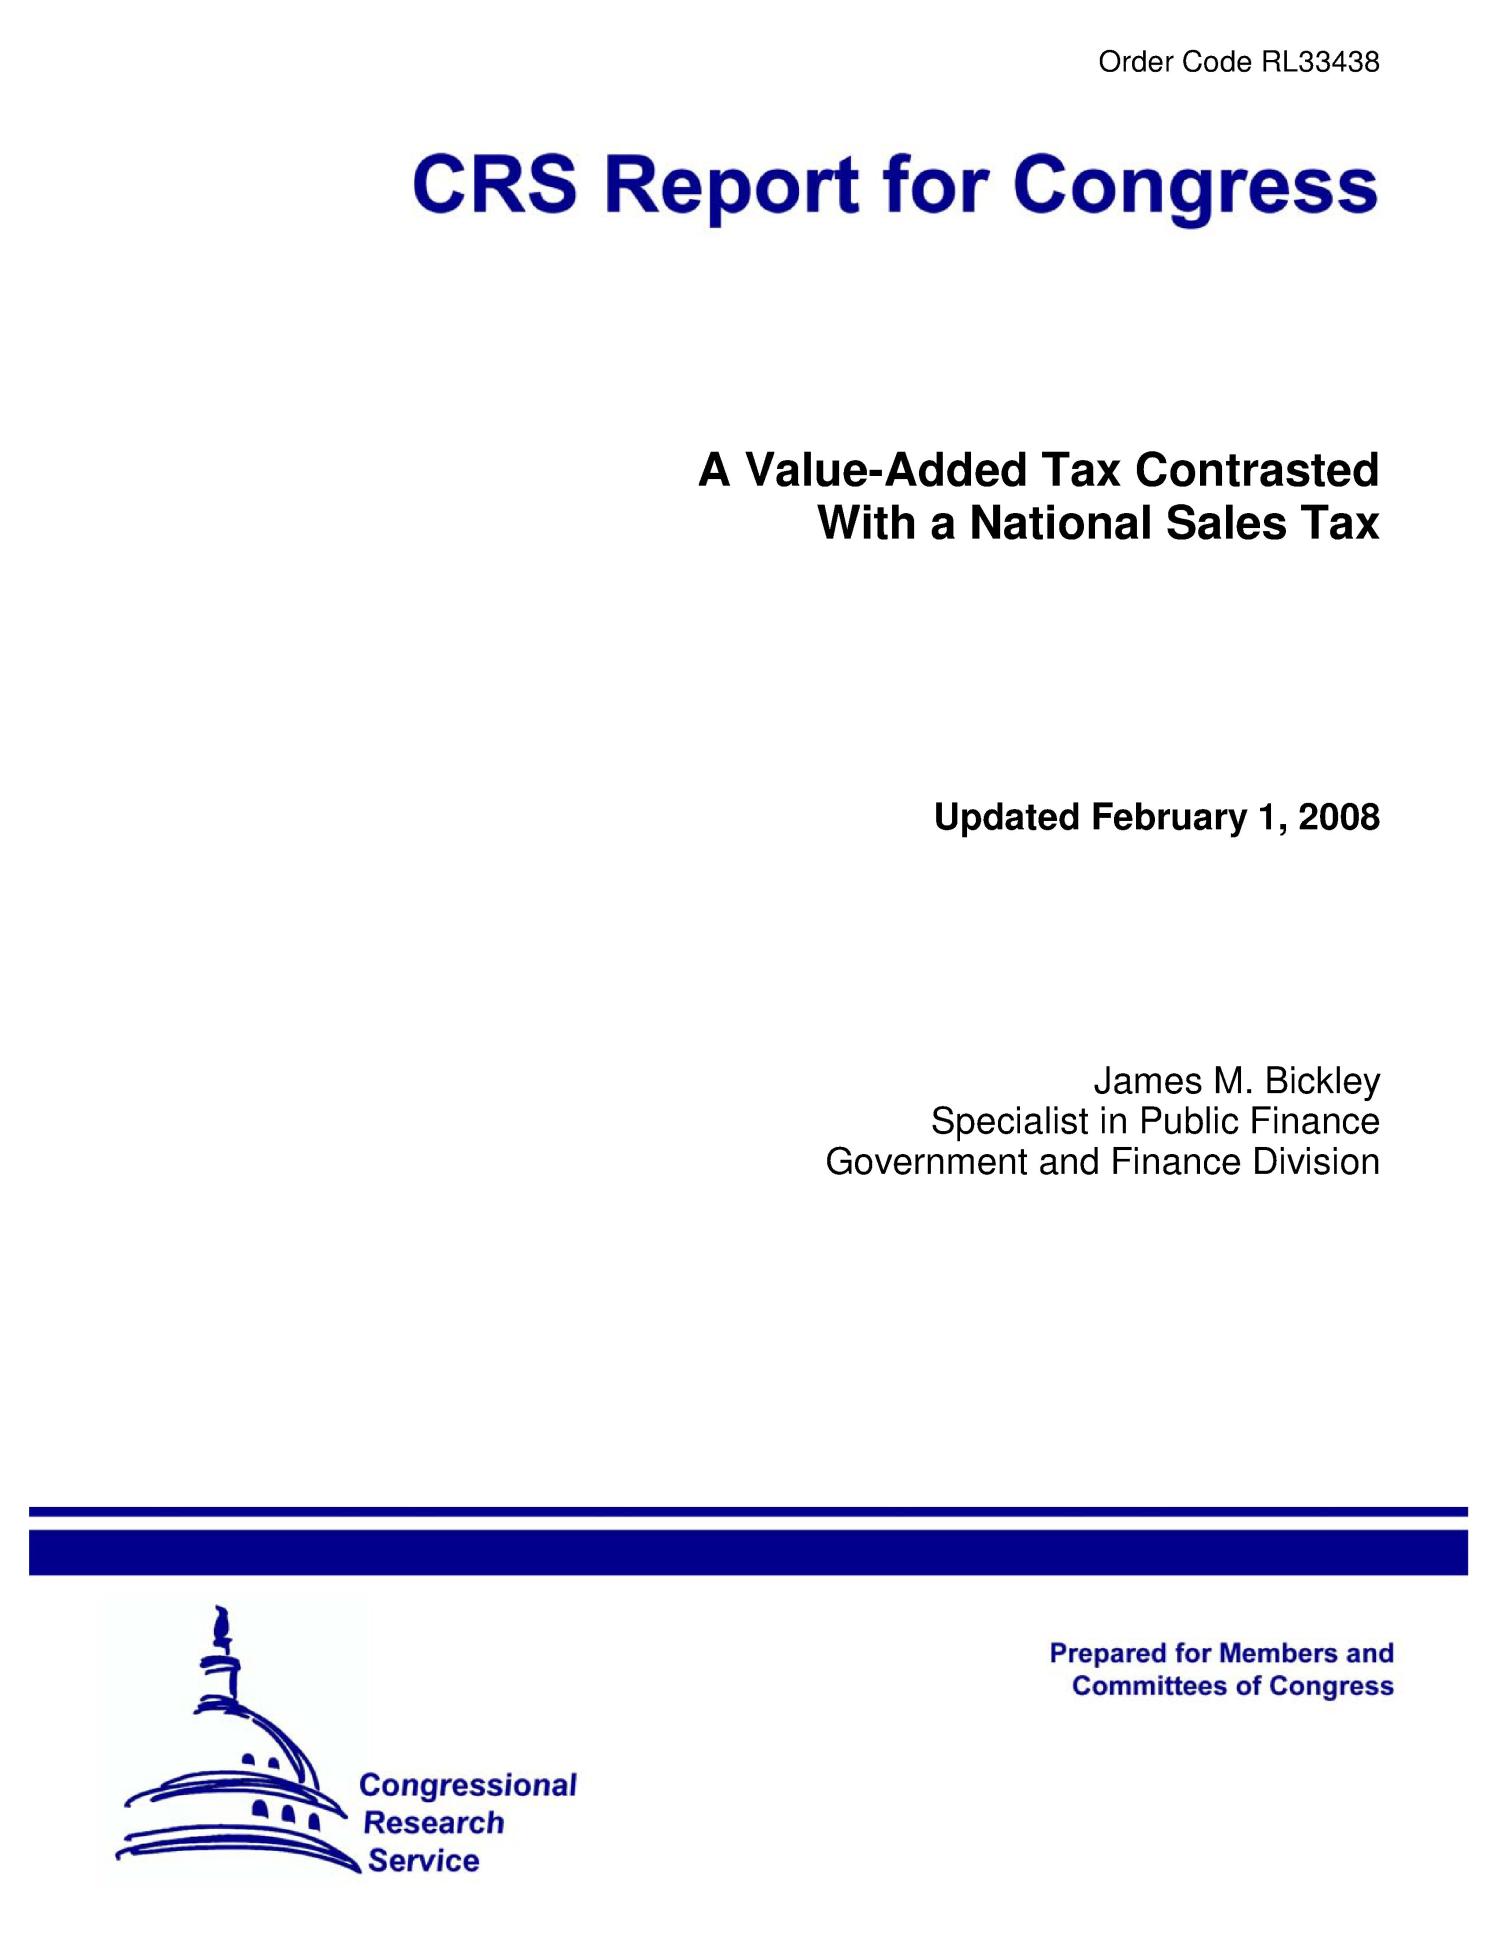 a-value-added-tax-contrasted-with-a-national-sales-tax-unt-digital